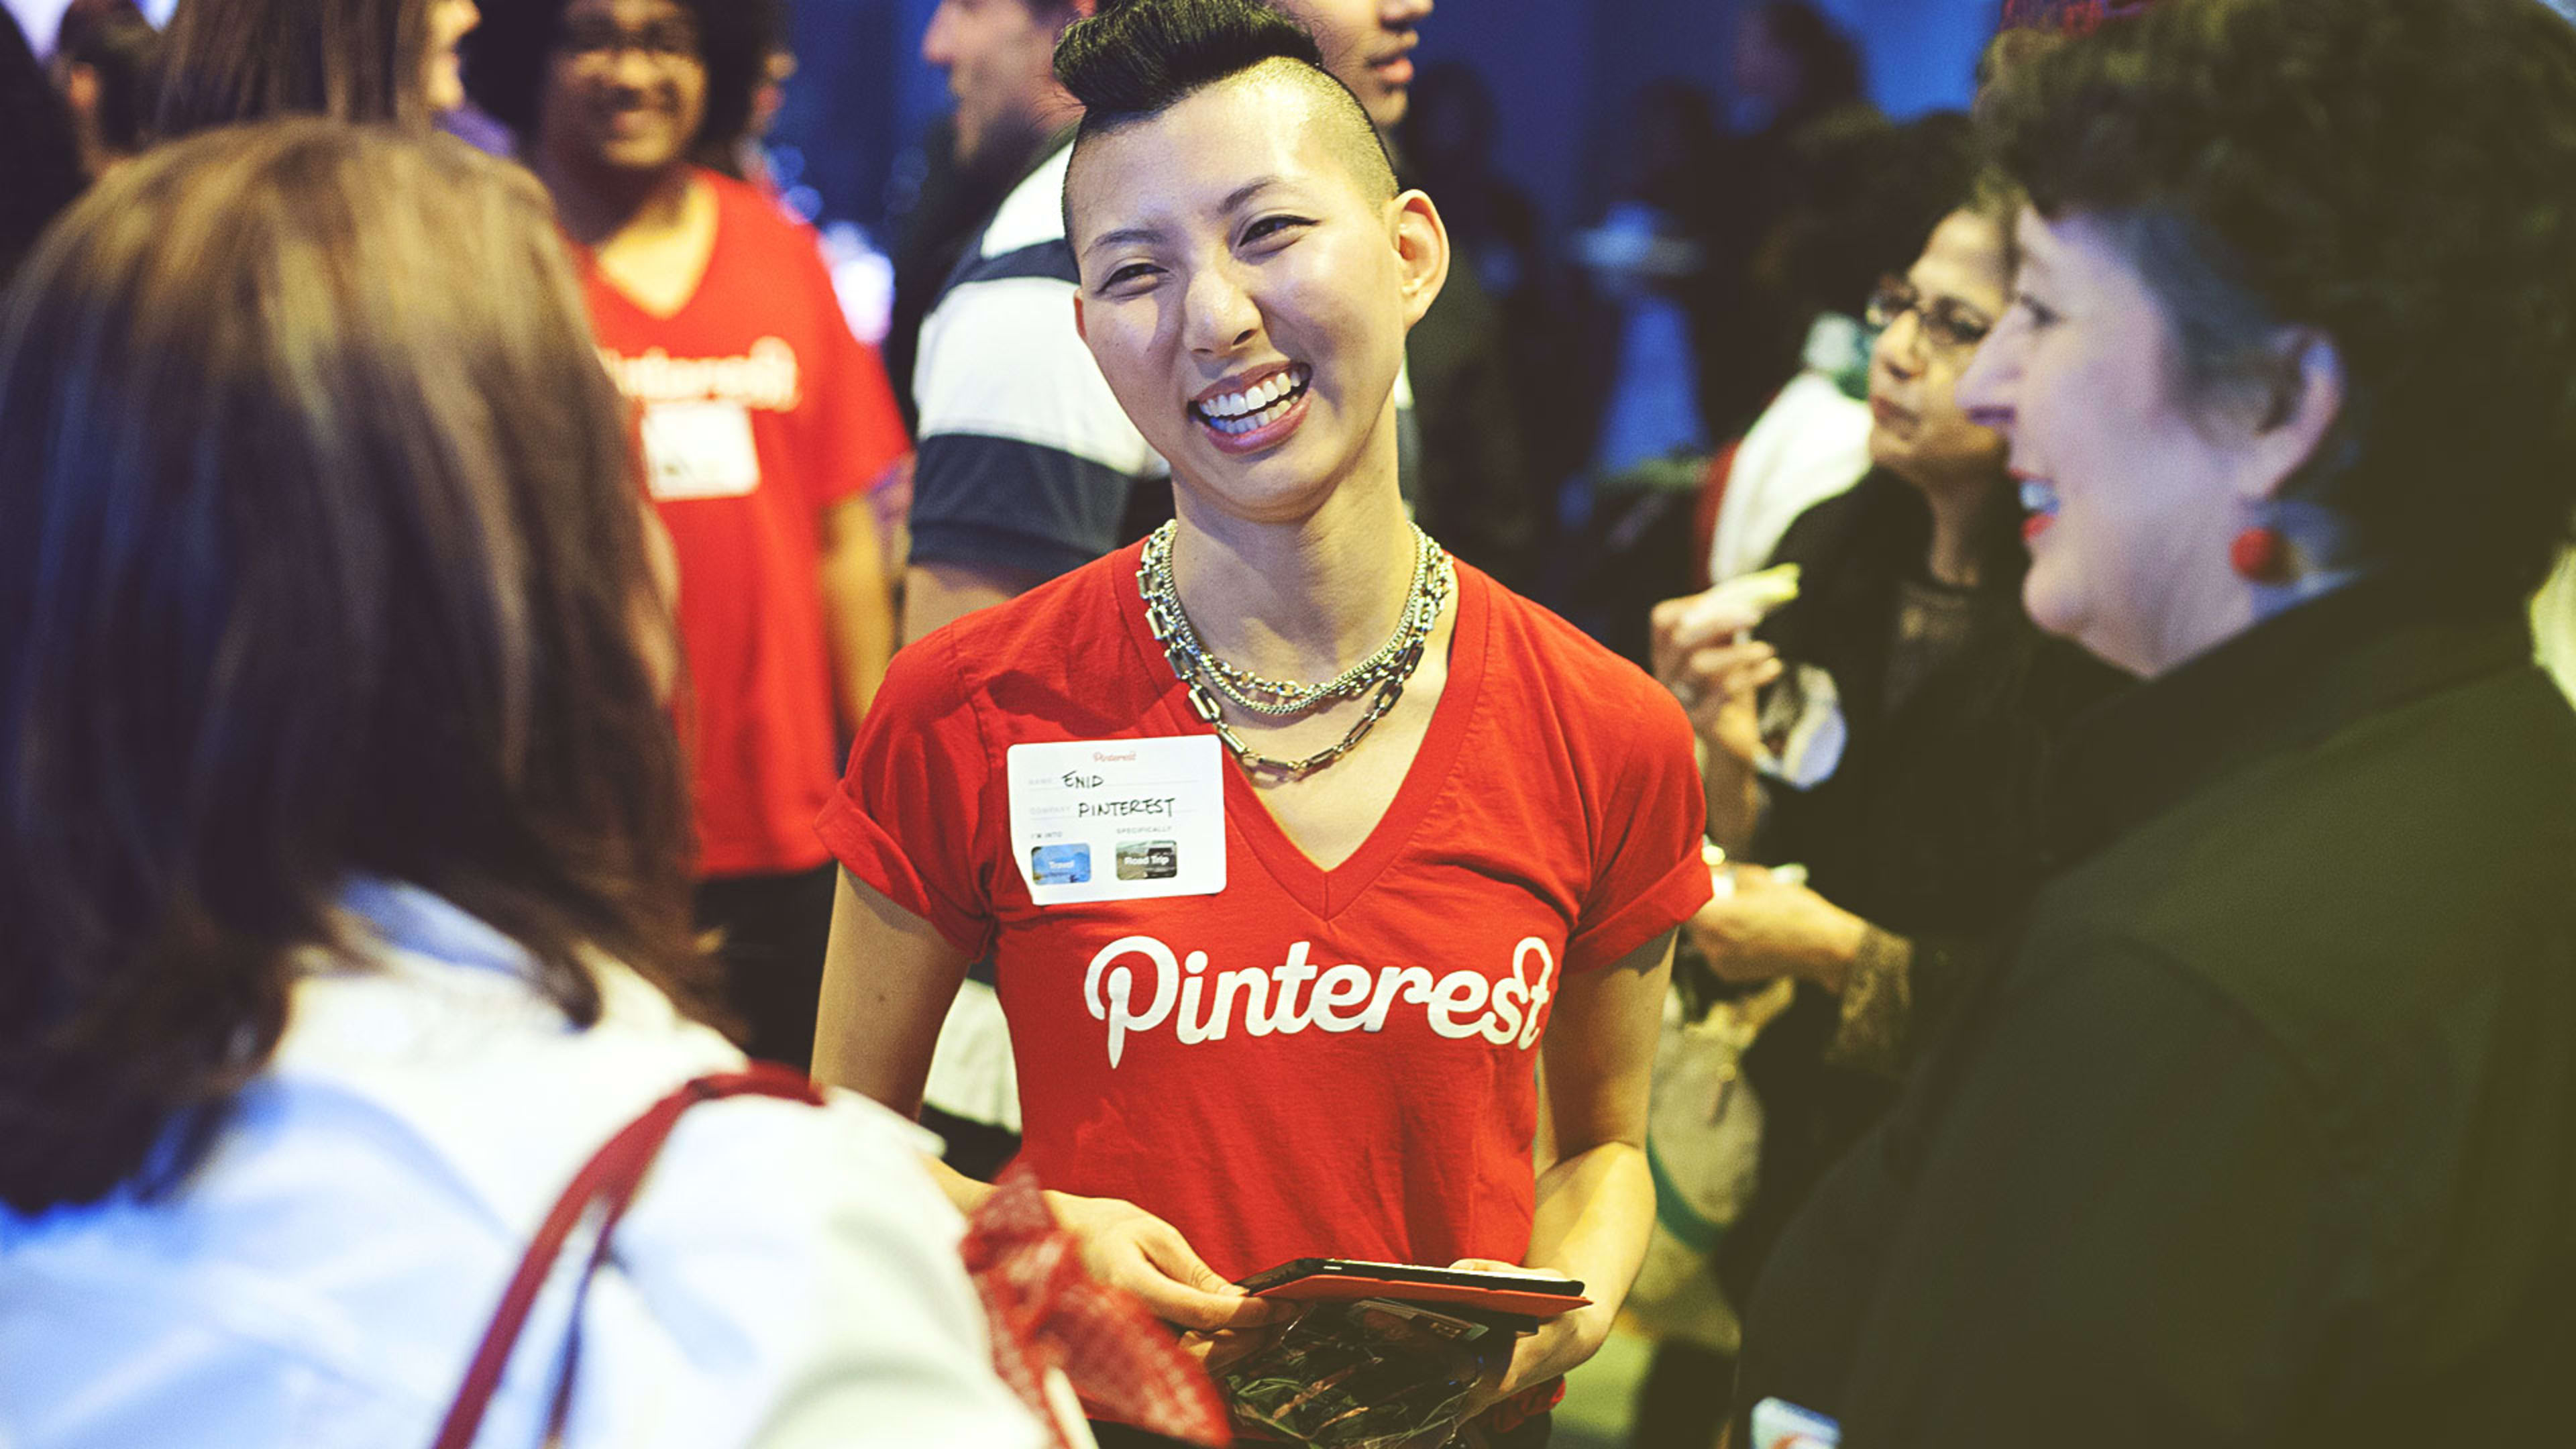 “We Had The Wrong Goal Initially”: Pinterest’s Diversity Chief Adjusts Course